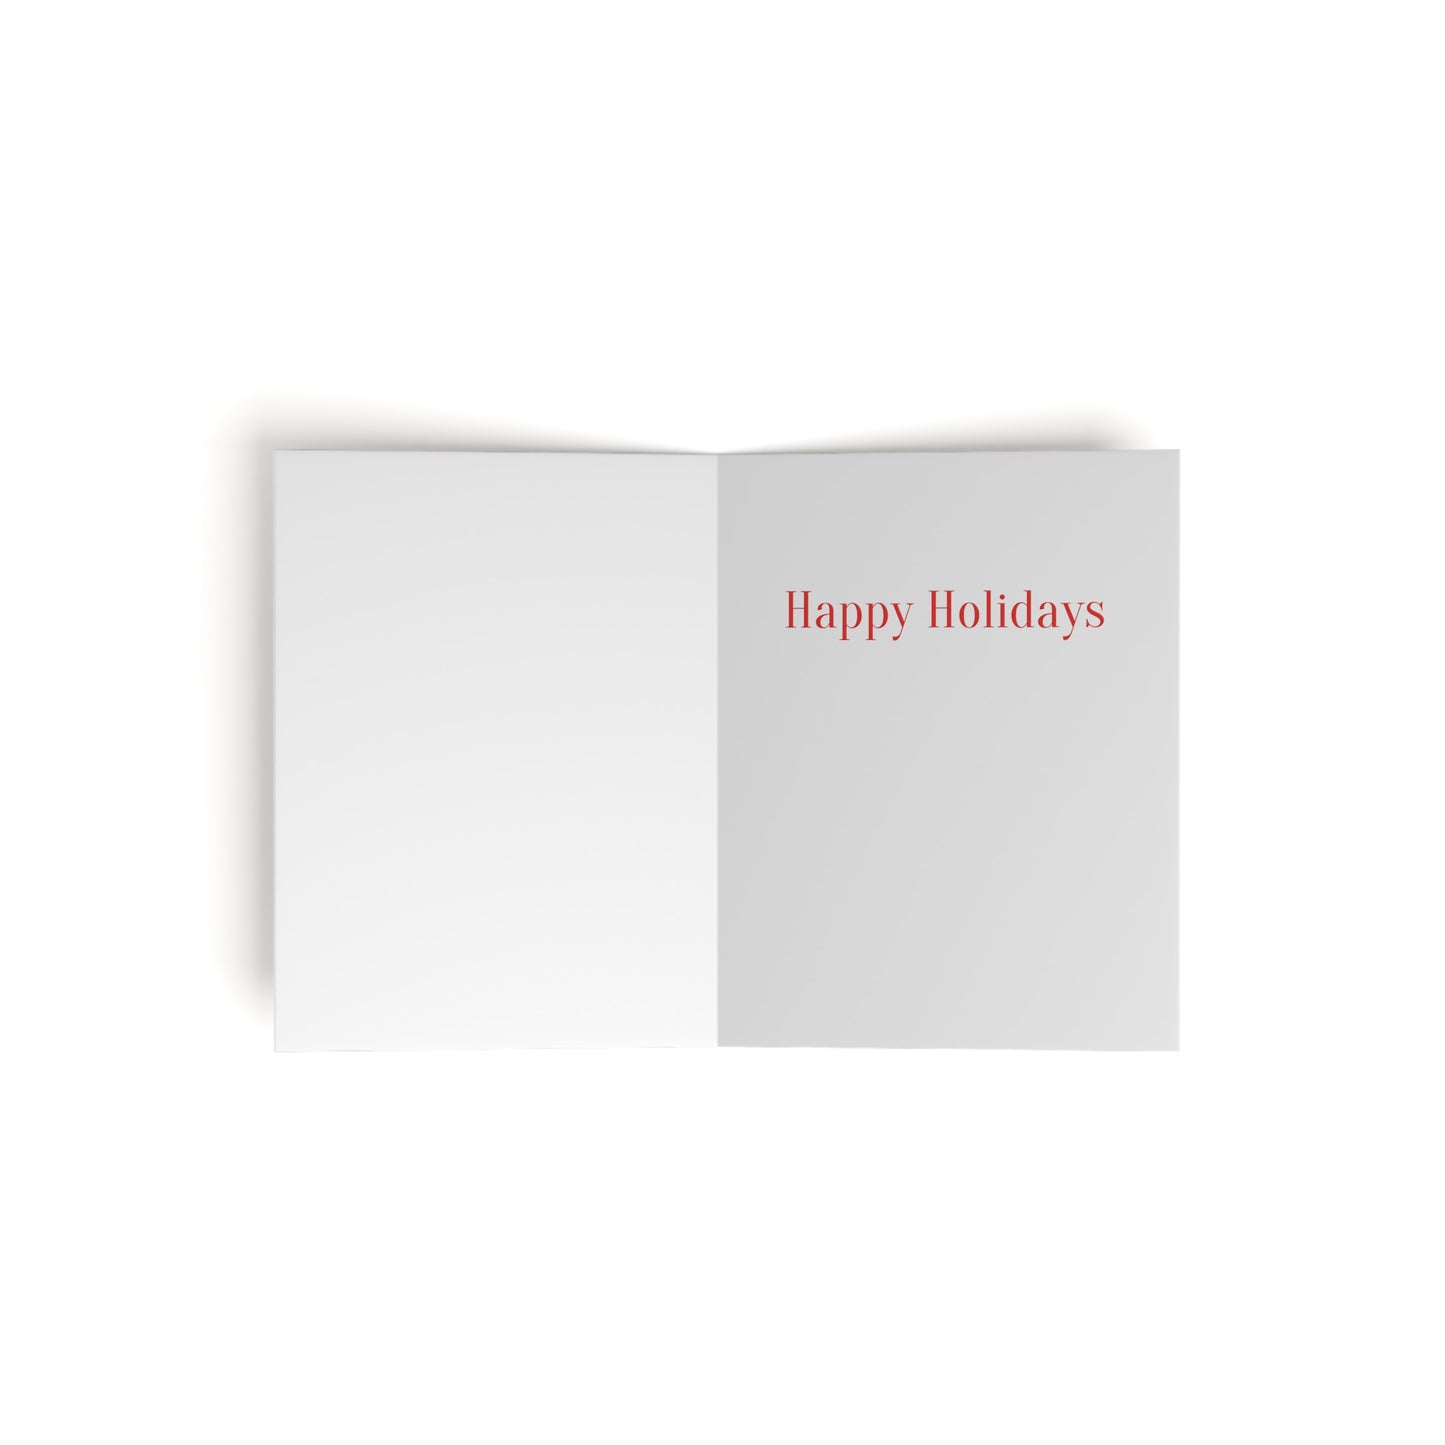 PlumbGoods Holiday Card - Perky Guides the Sleigh